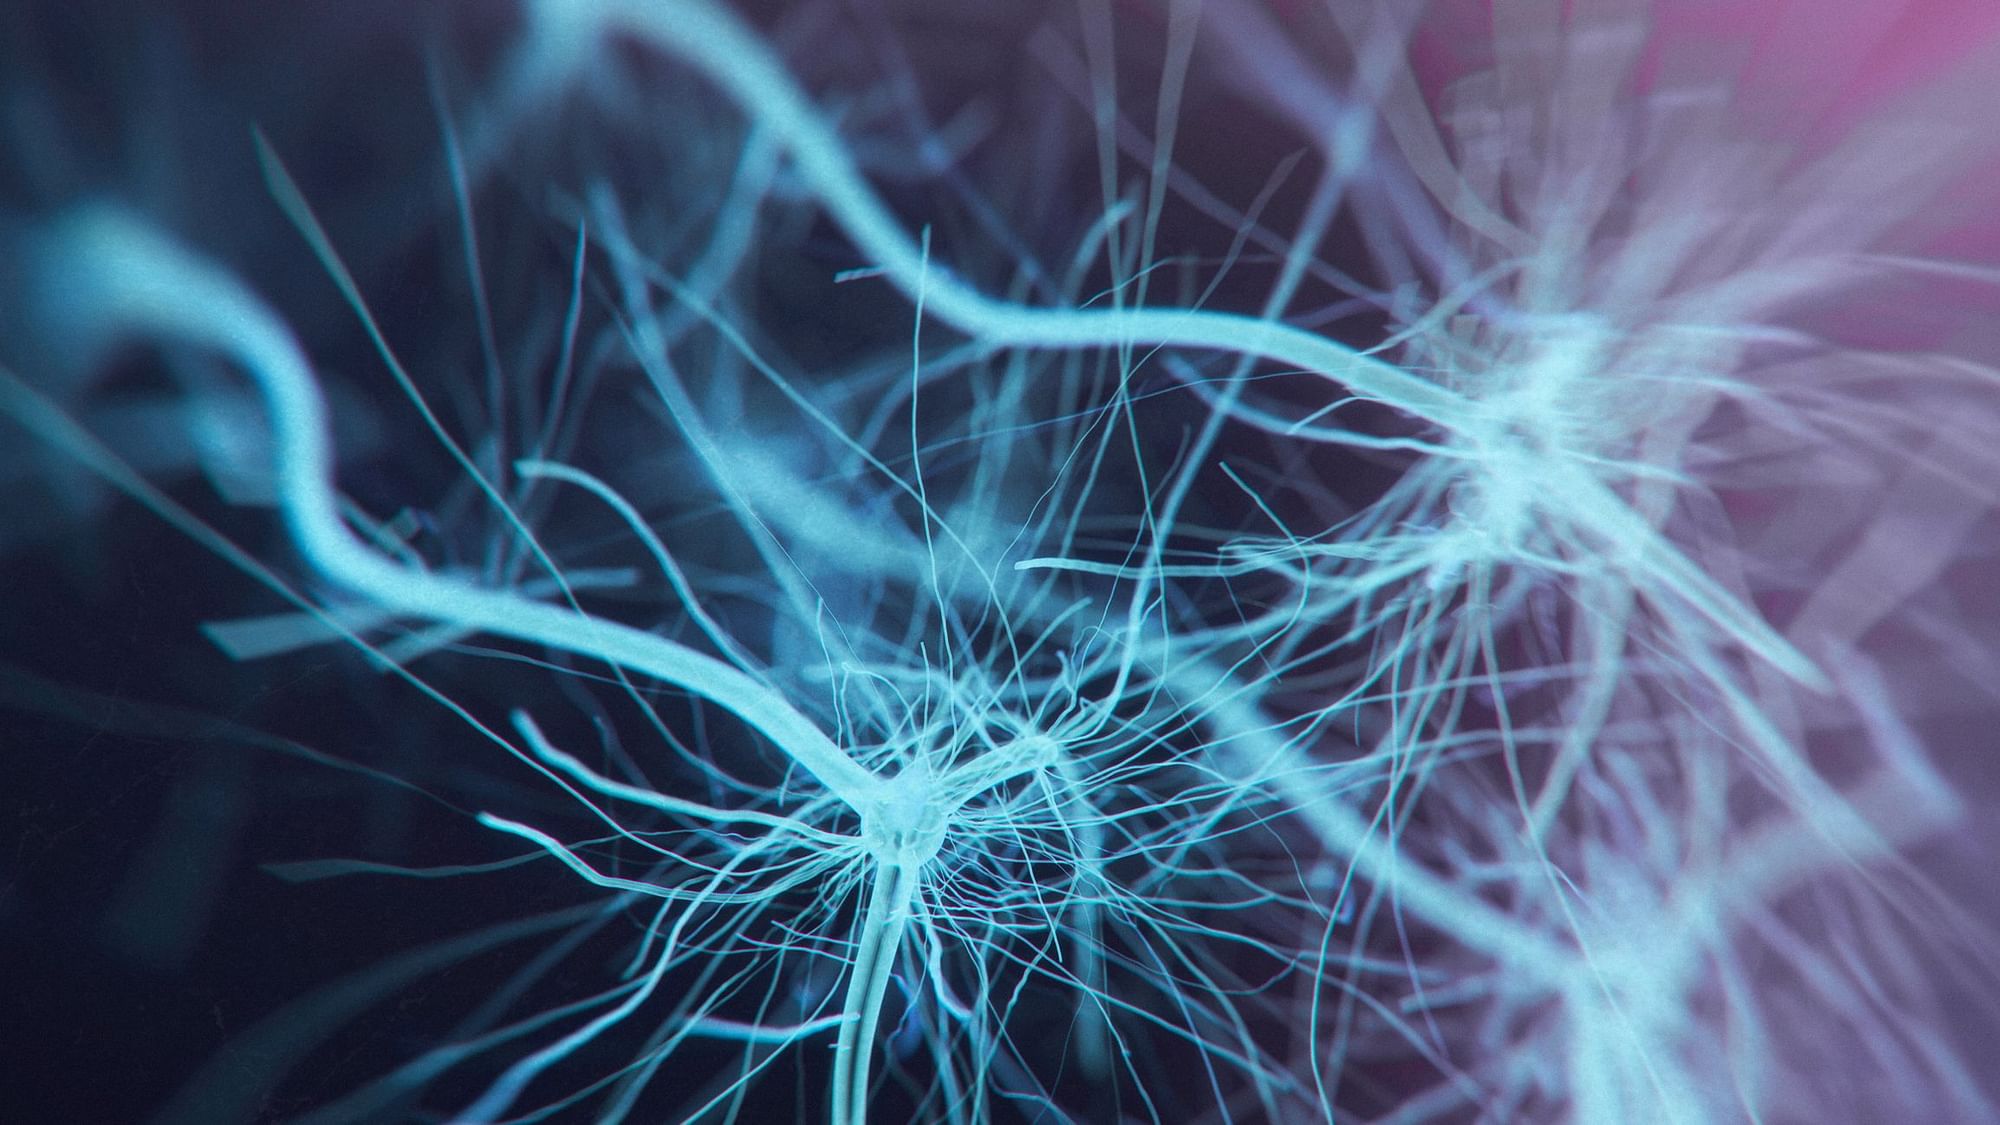 A team of US researchers has successfully used stem cells to develop 3D models of neural networks.